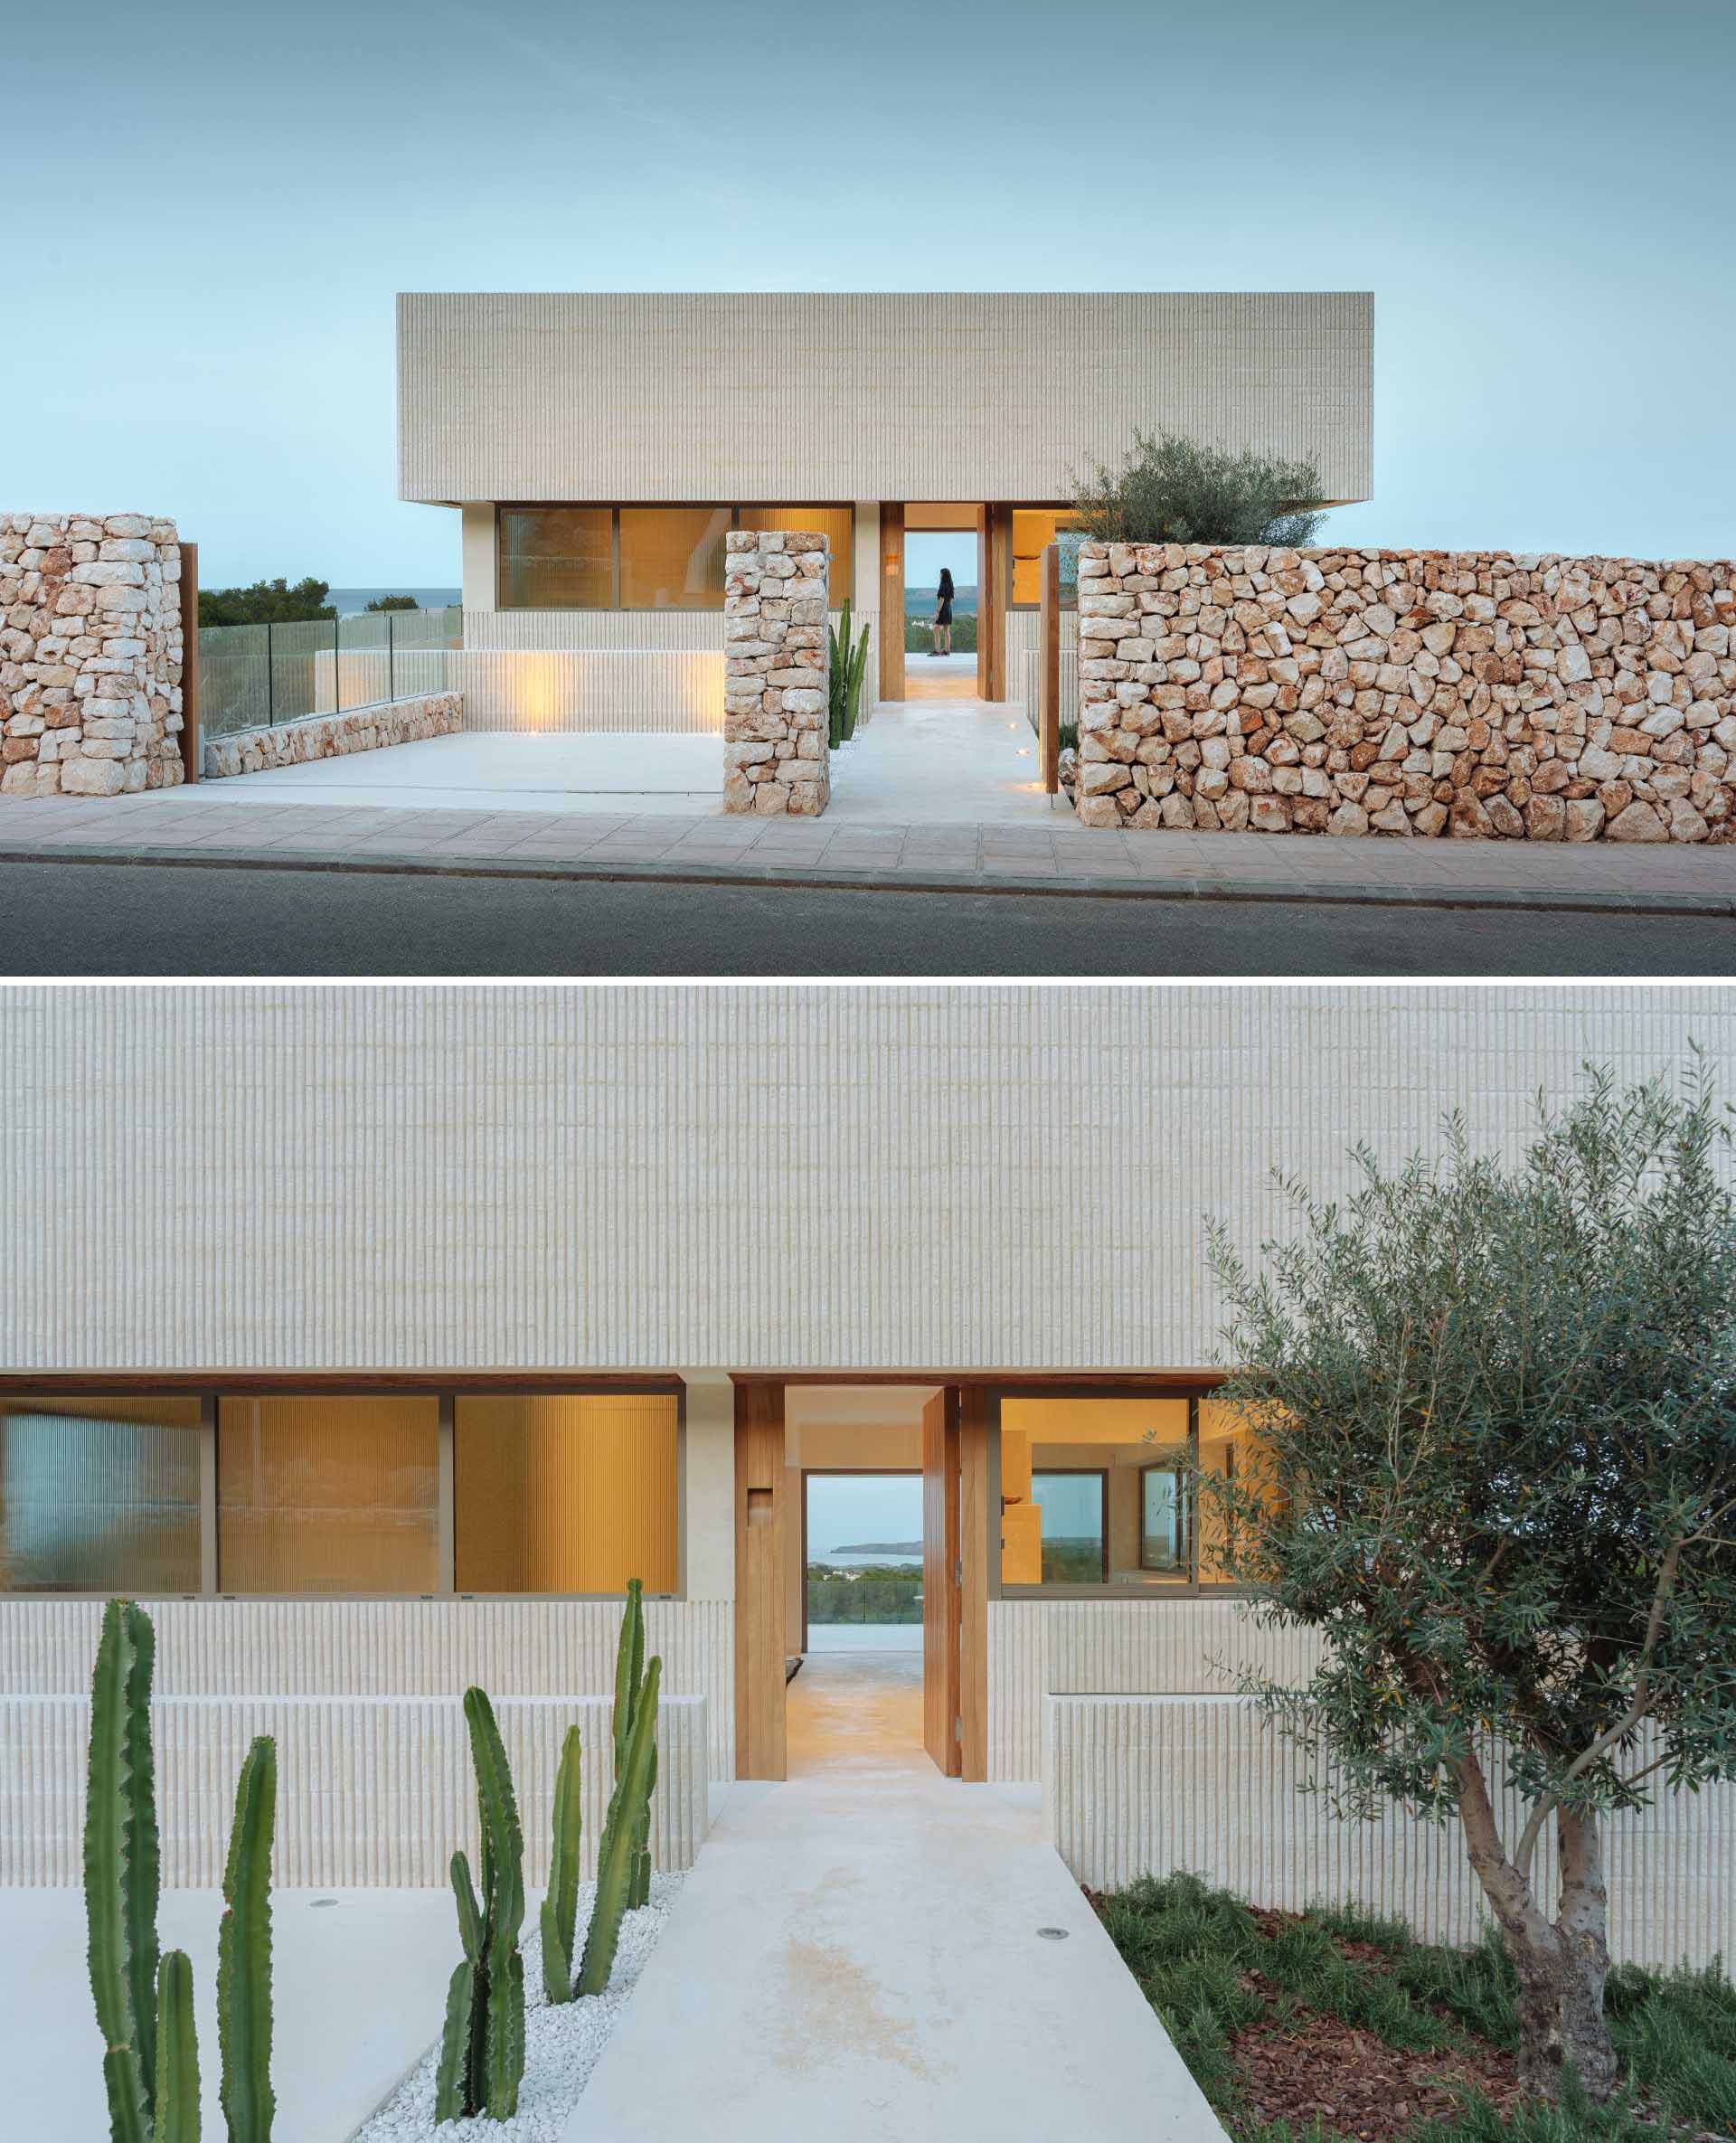 A modern multi-storey home in Menorca, Spain, that features a textured facade of fluted concrete walls and a stone wall.